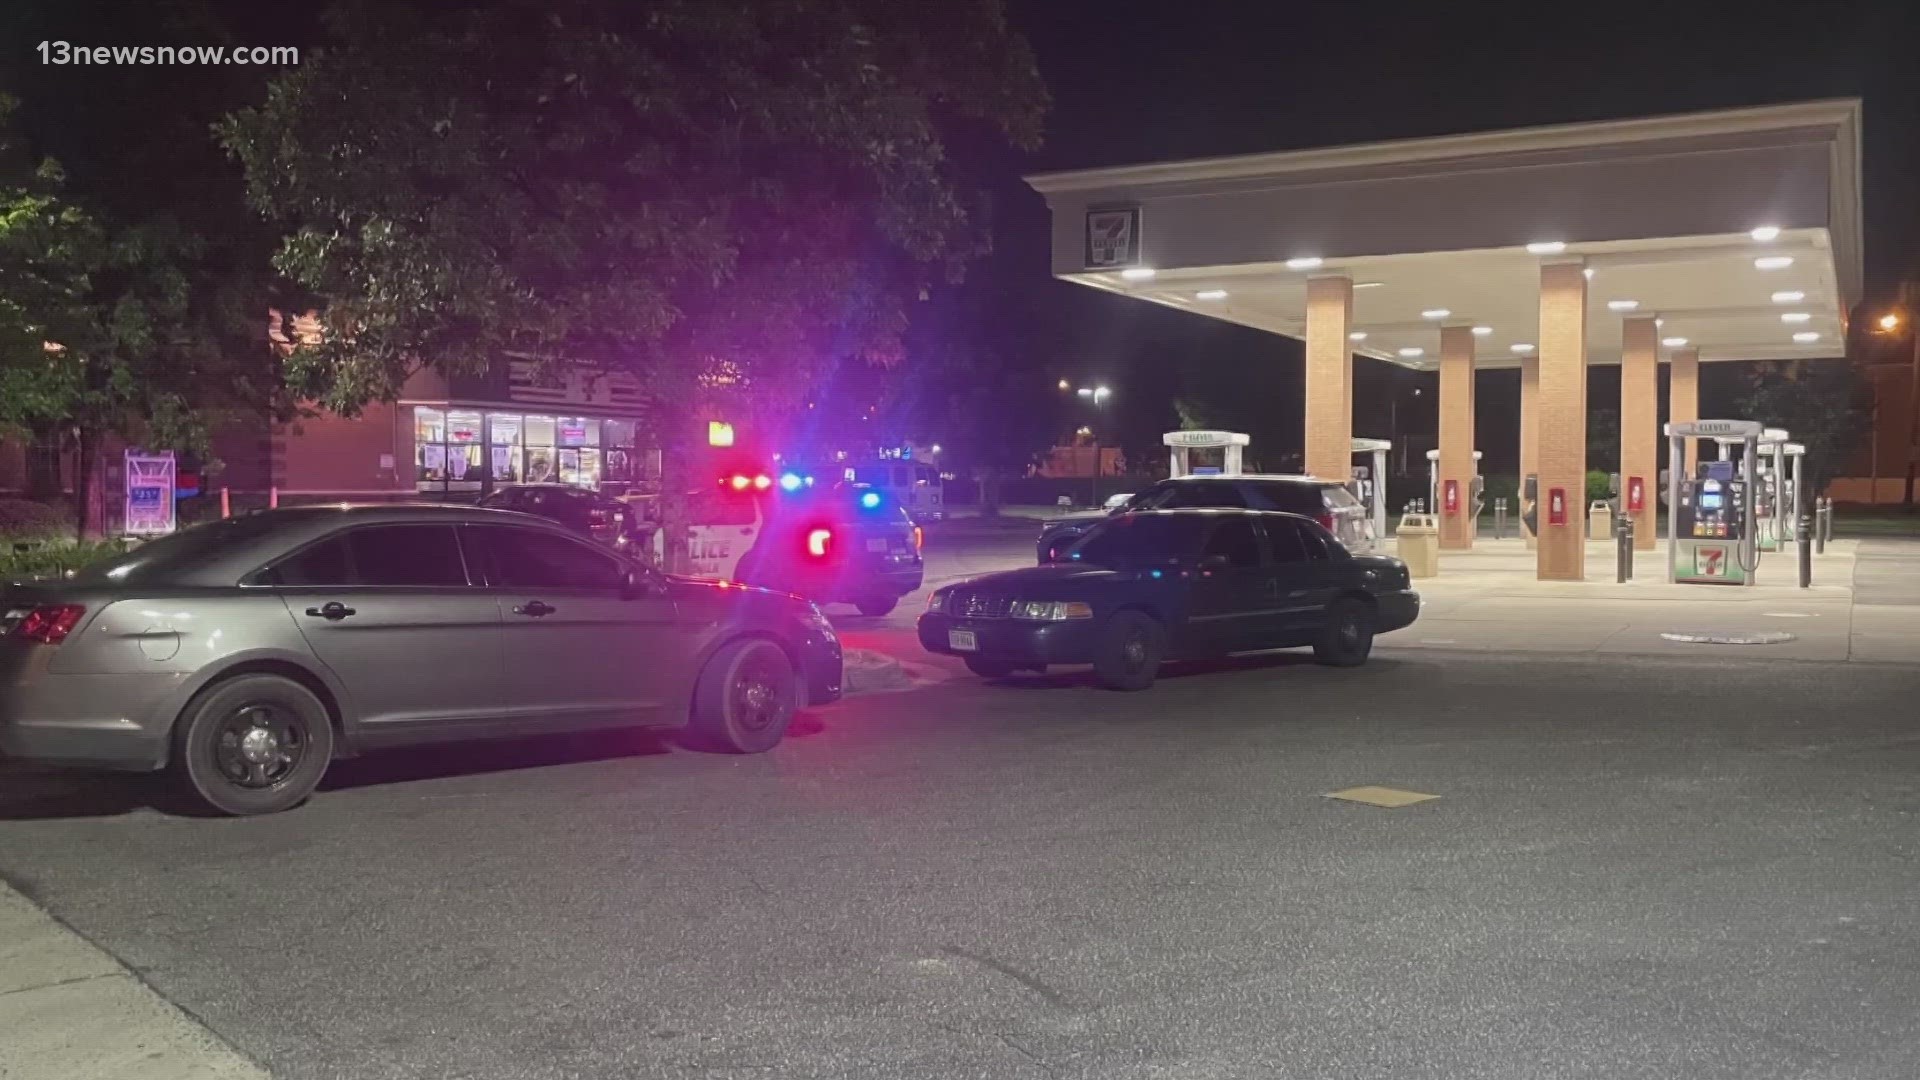 Officers arrived to find a store employee inside suffering from a non-life-threatening gunshot wound. A second gunshot victim was found outside the store.